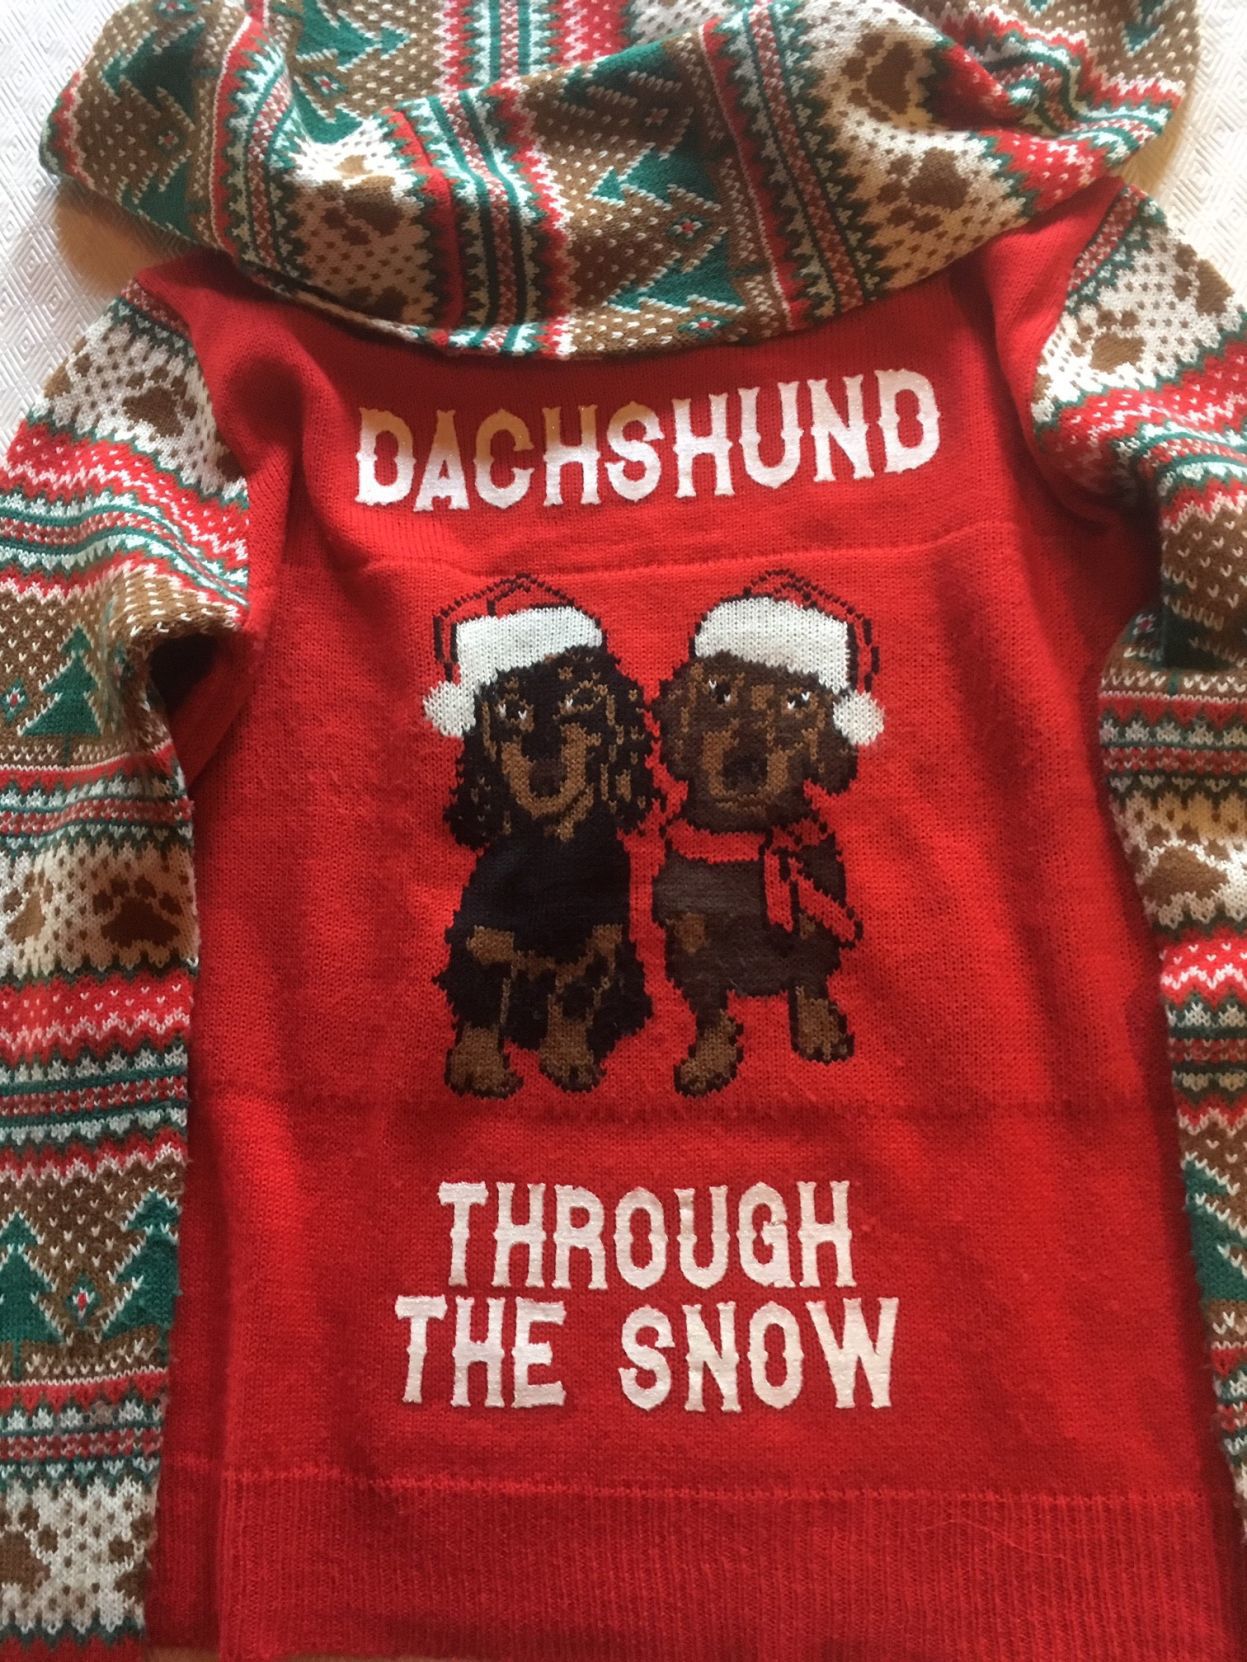 wiener dog ugly christmas sweater